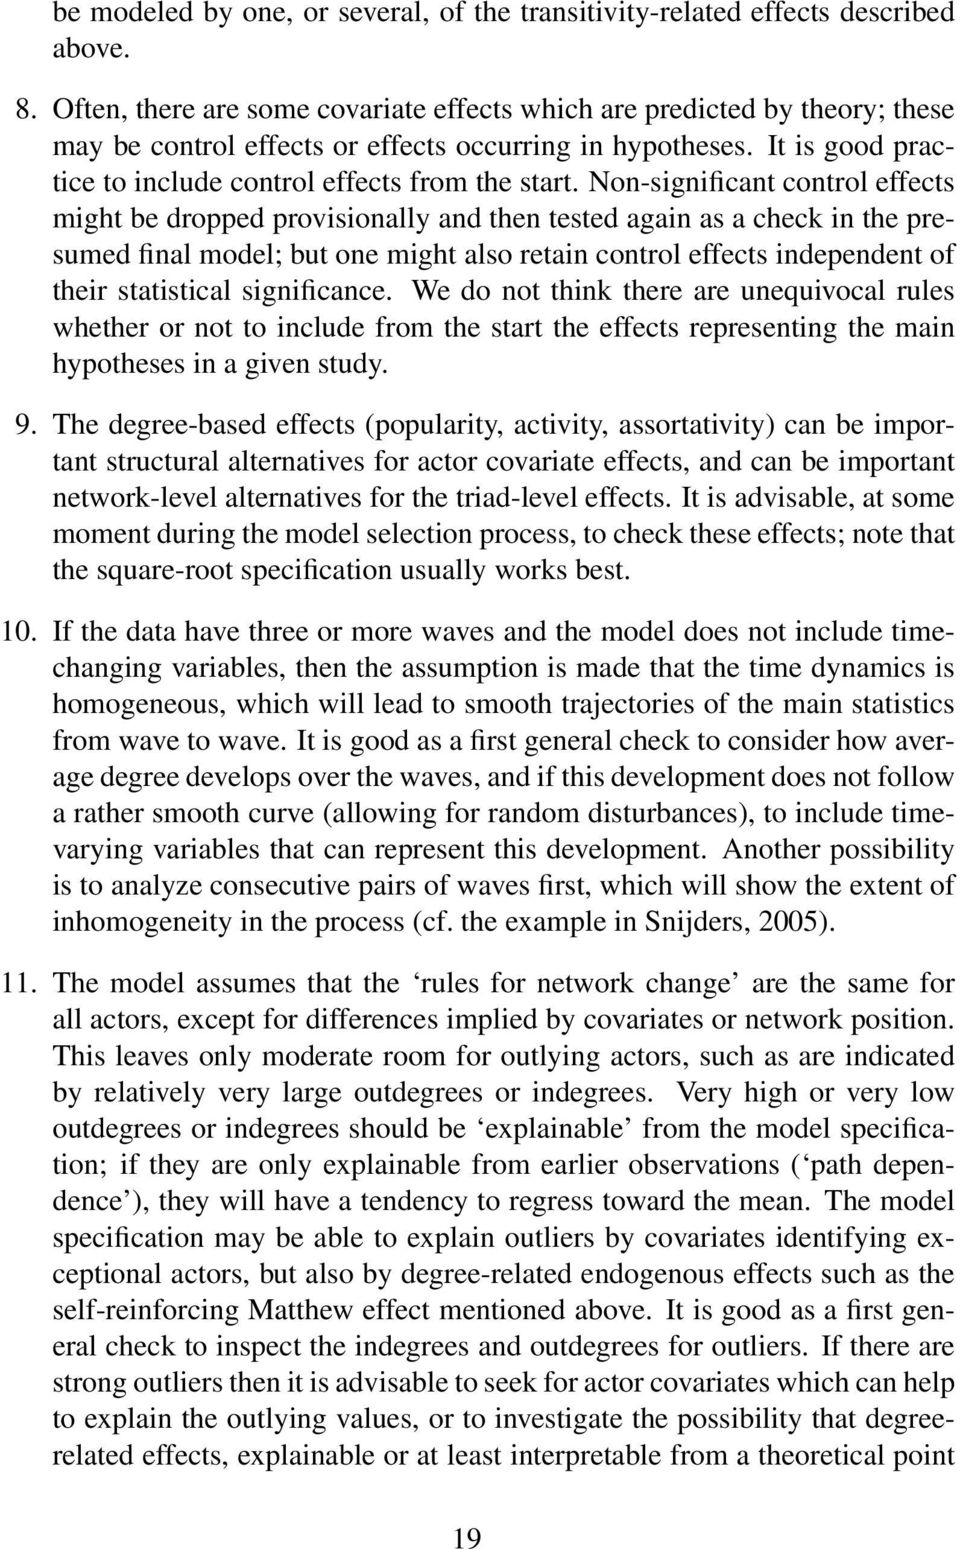 Non-significant control effects might be dropped provisionally and then tested again as a check in the presumed final model; but one might also retain control effects independent of their statistical